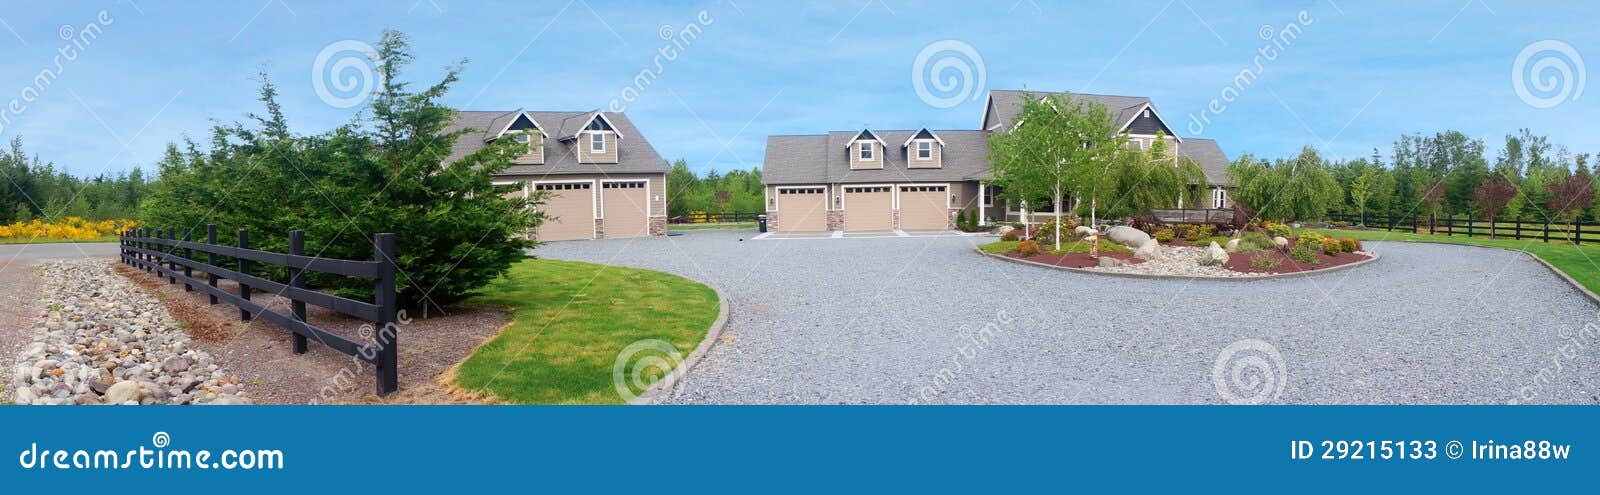 large farm country house with gravel driveway and green landscape.